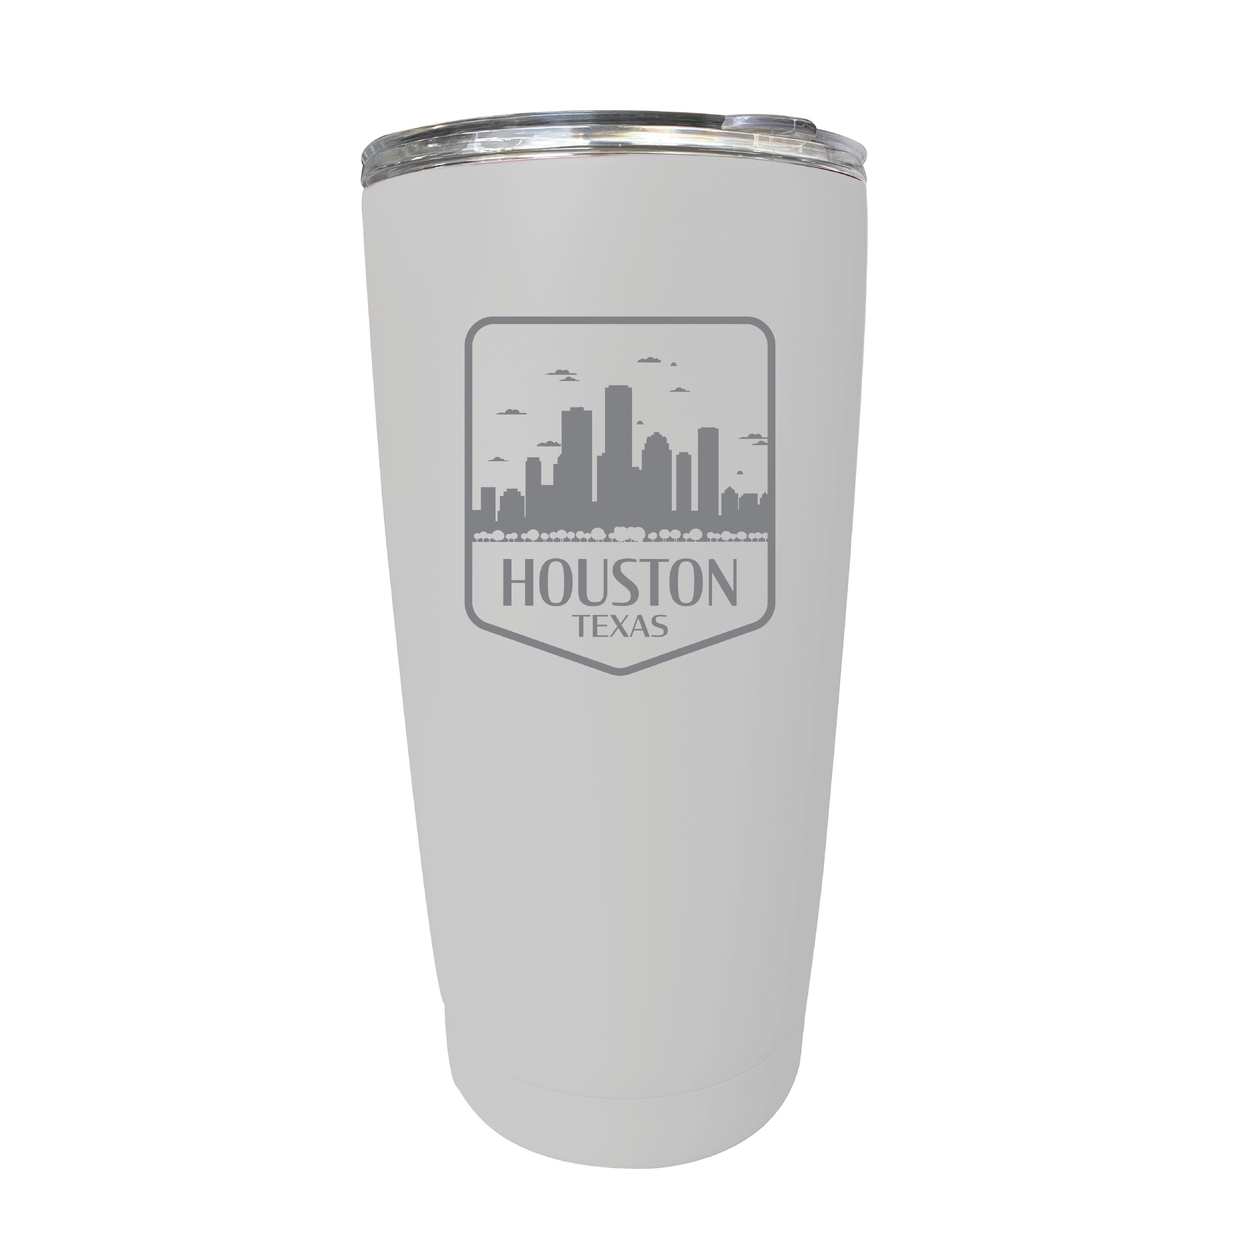 Houston Texas Souvenir 16 Oz Engraved Stainless Steel Insulated Tumbler - Purple,,2-Pack